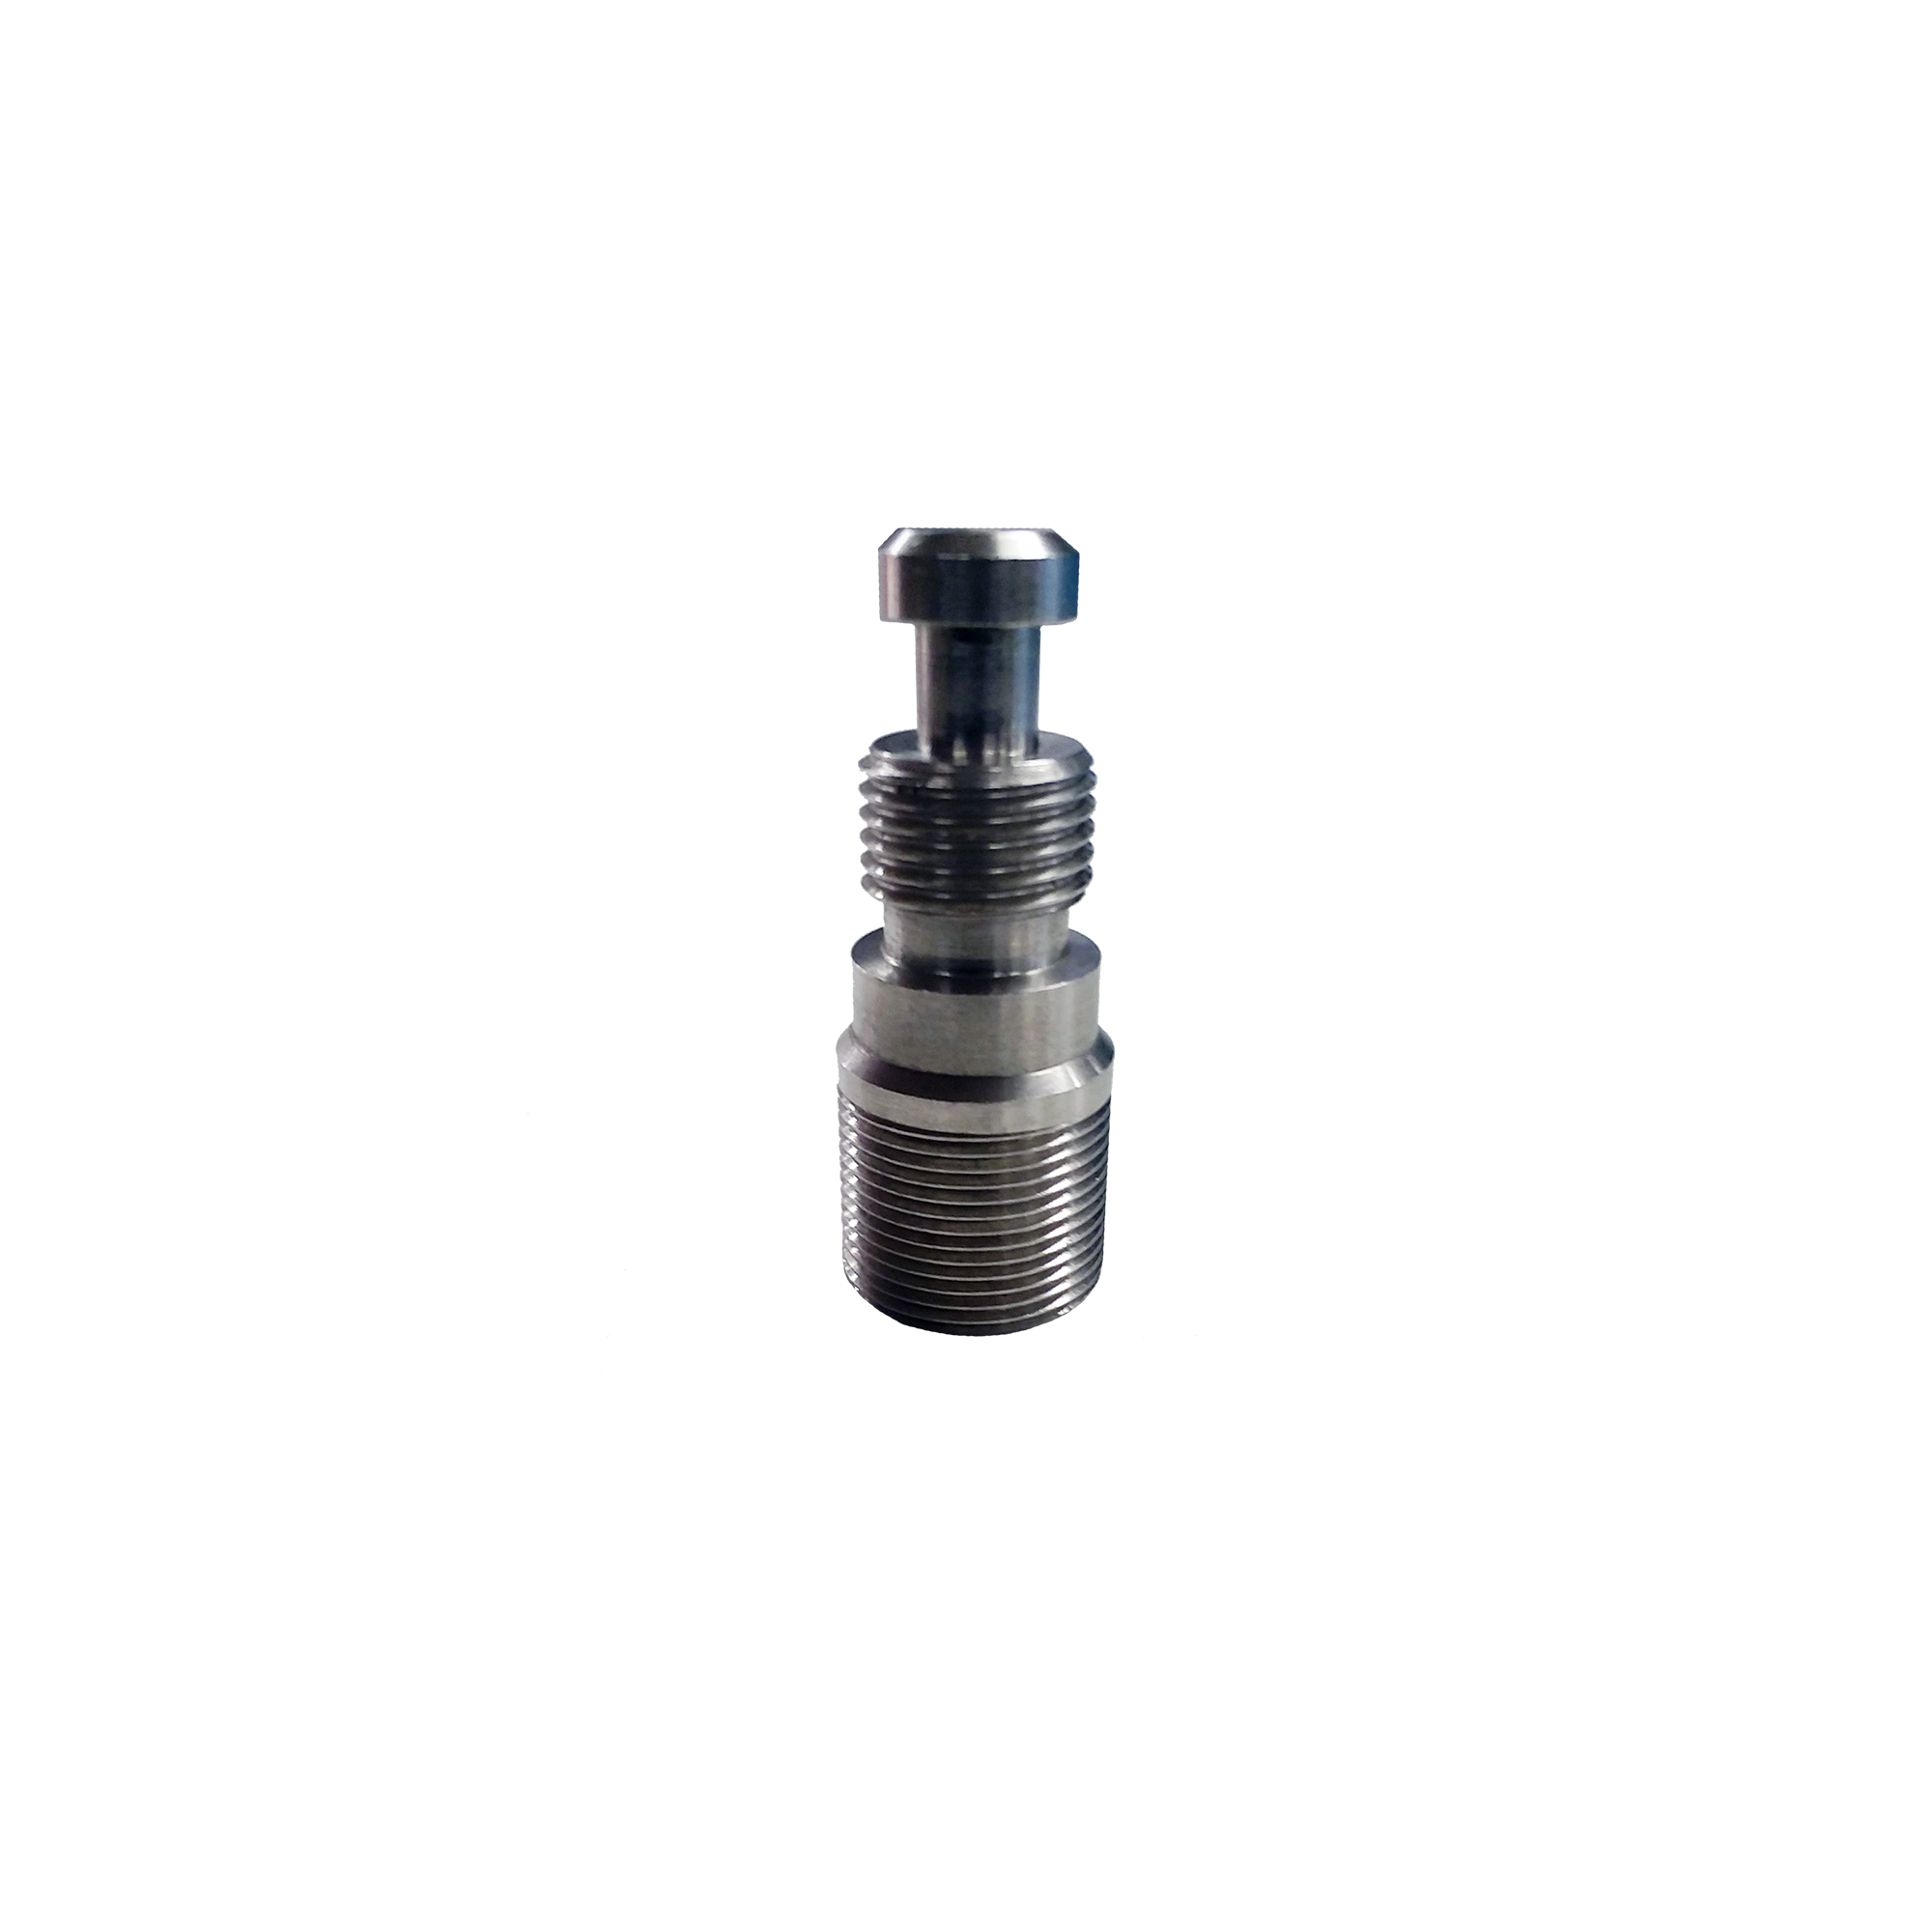 【16233】REPLACEMENT 5/8-27 MIC STUD FOR